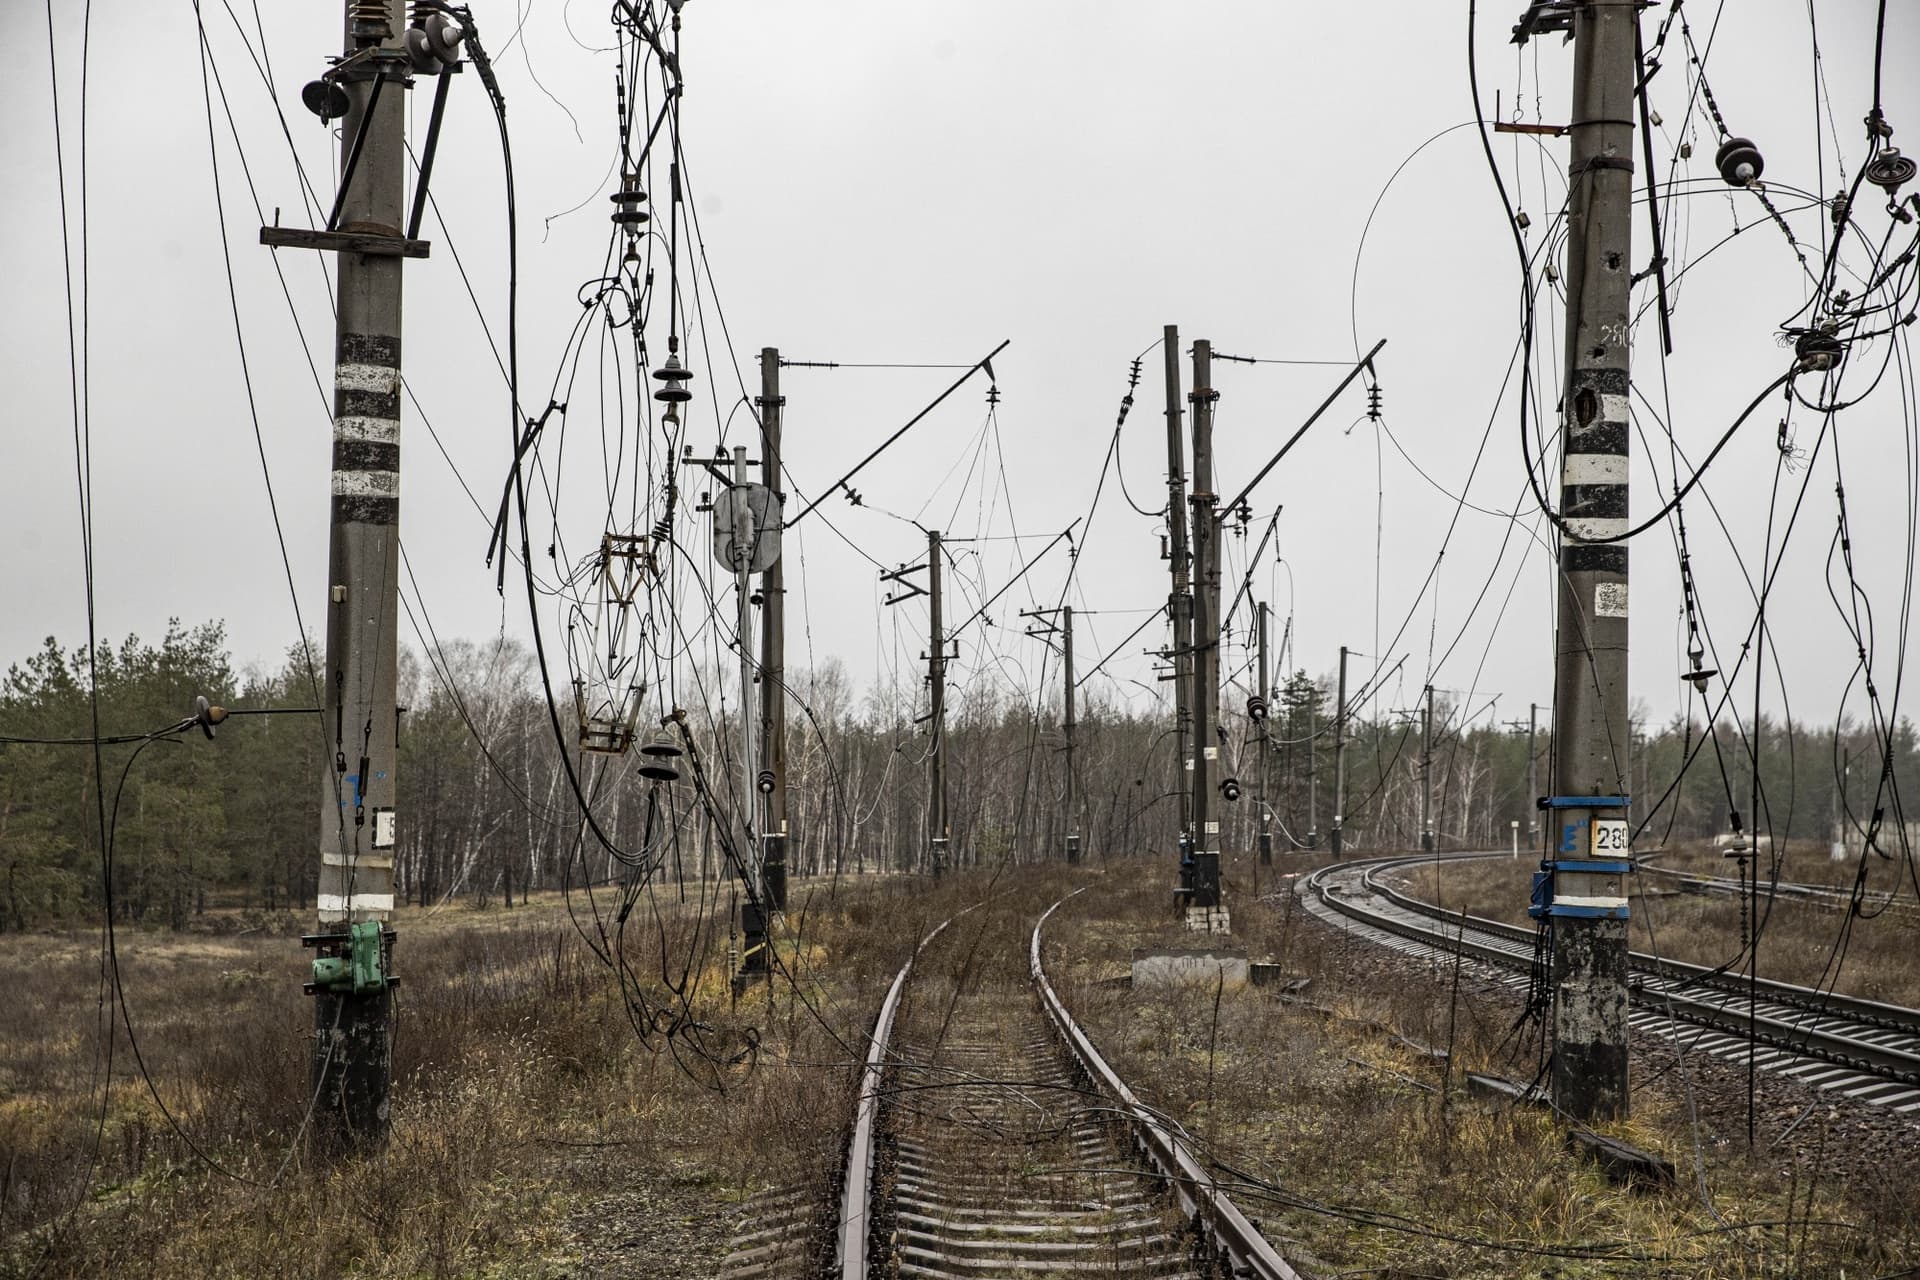 A view of damaged electrical wires after Ukrainian army retaken control from the Russian forces in Lyman